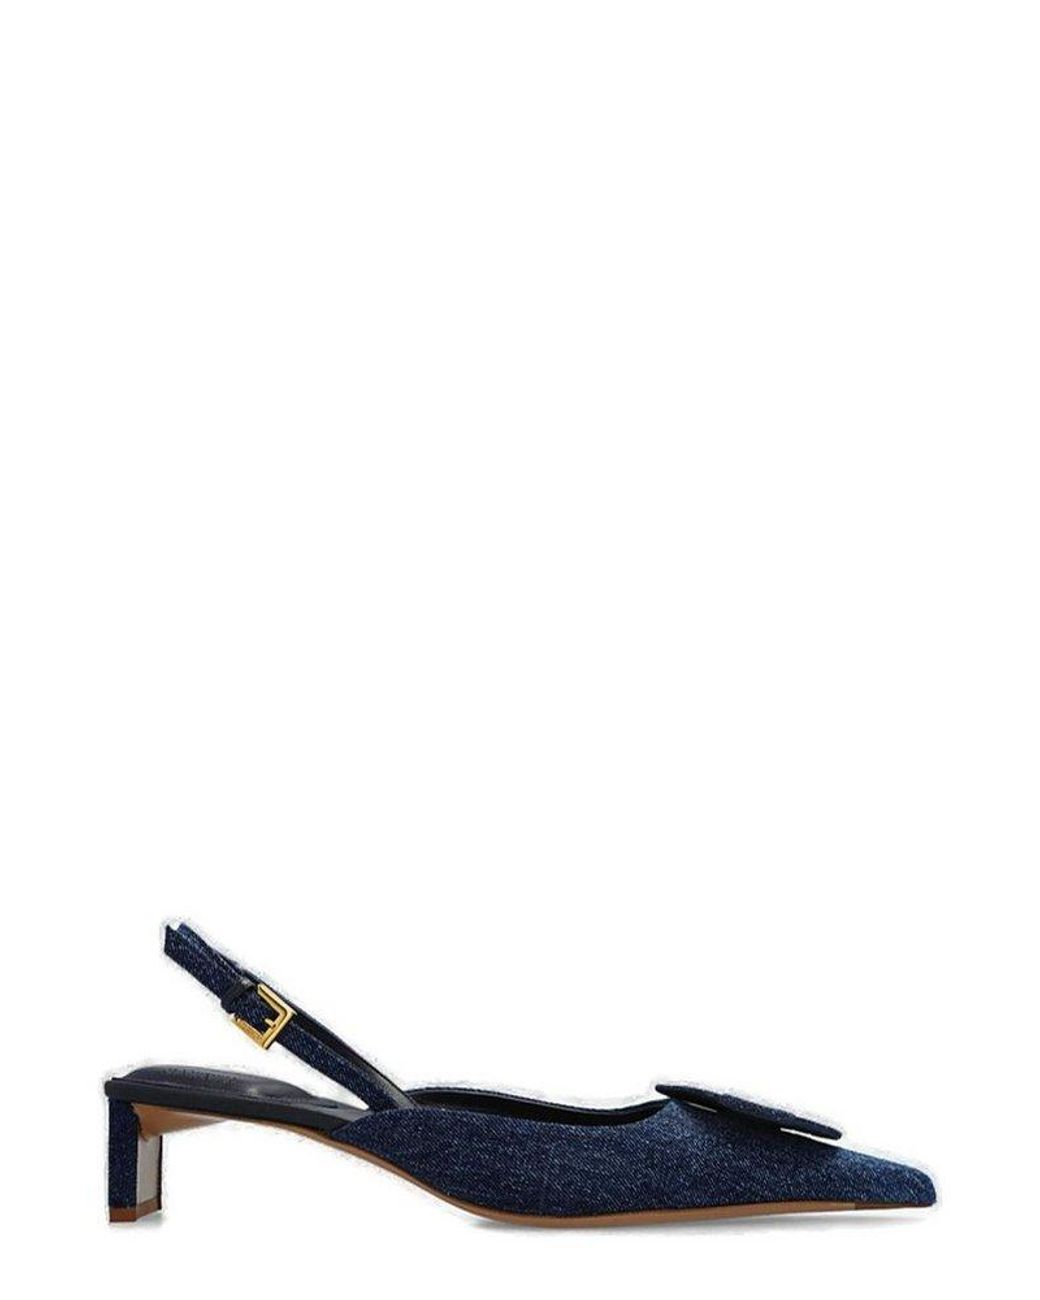 Jacquemus Duelo Round Square Slingbacks in Blue | Lyst UK